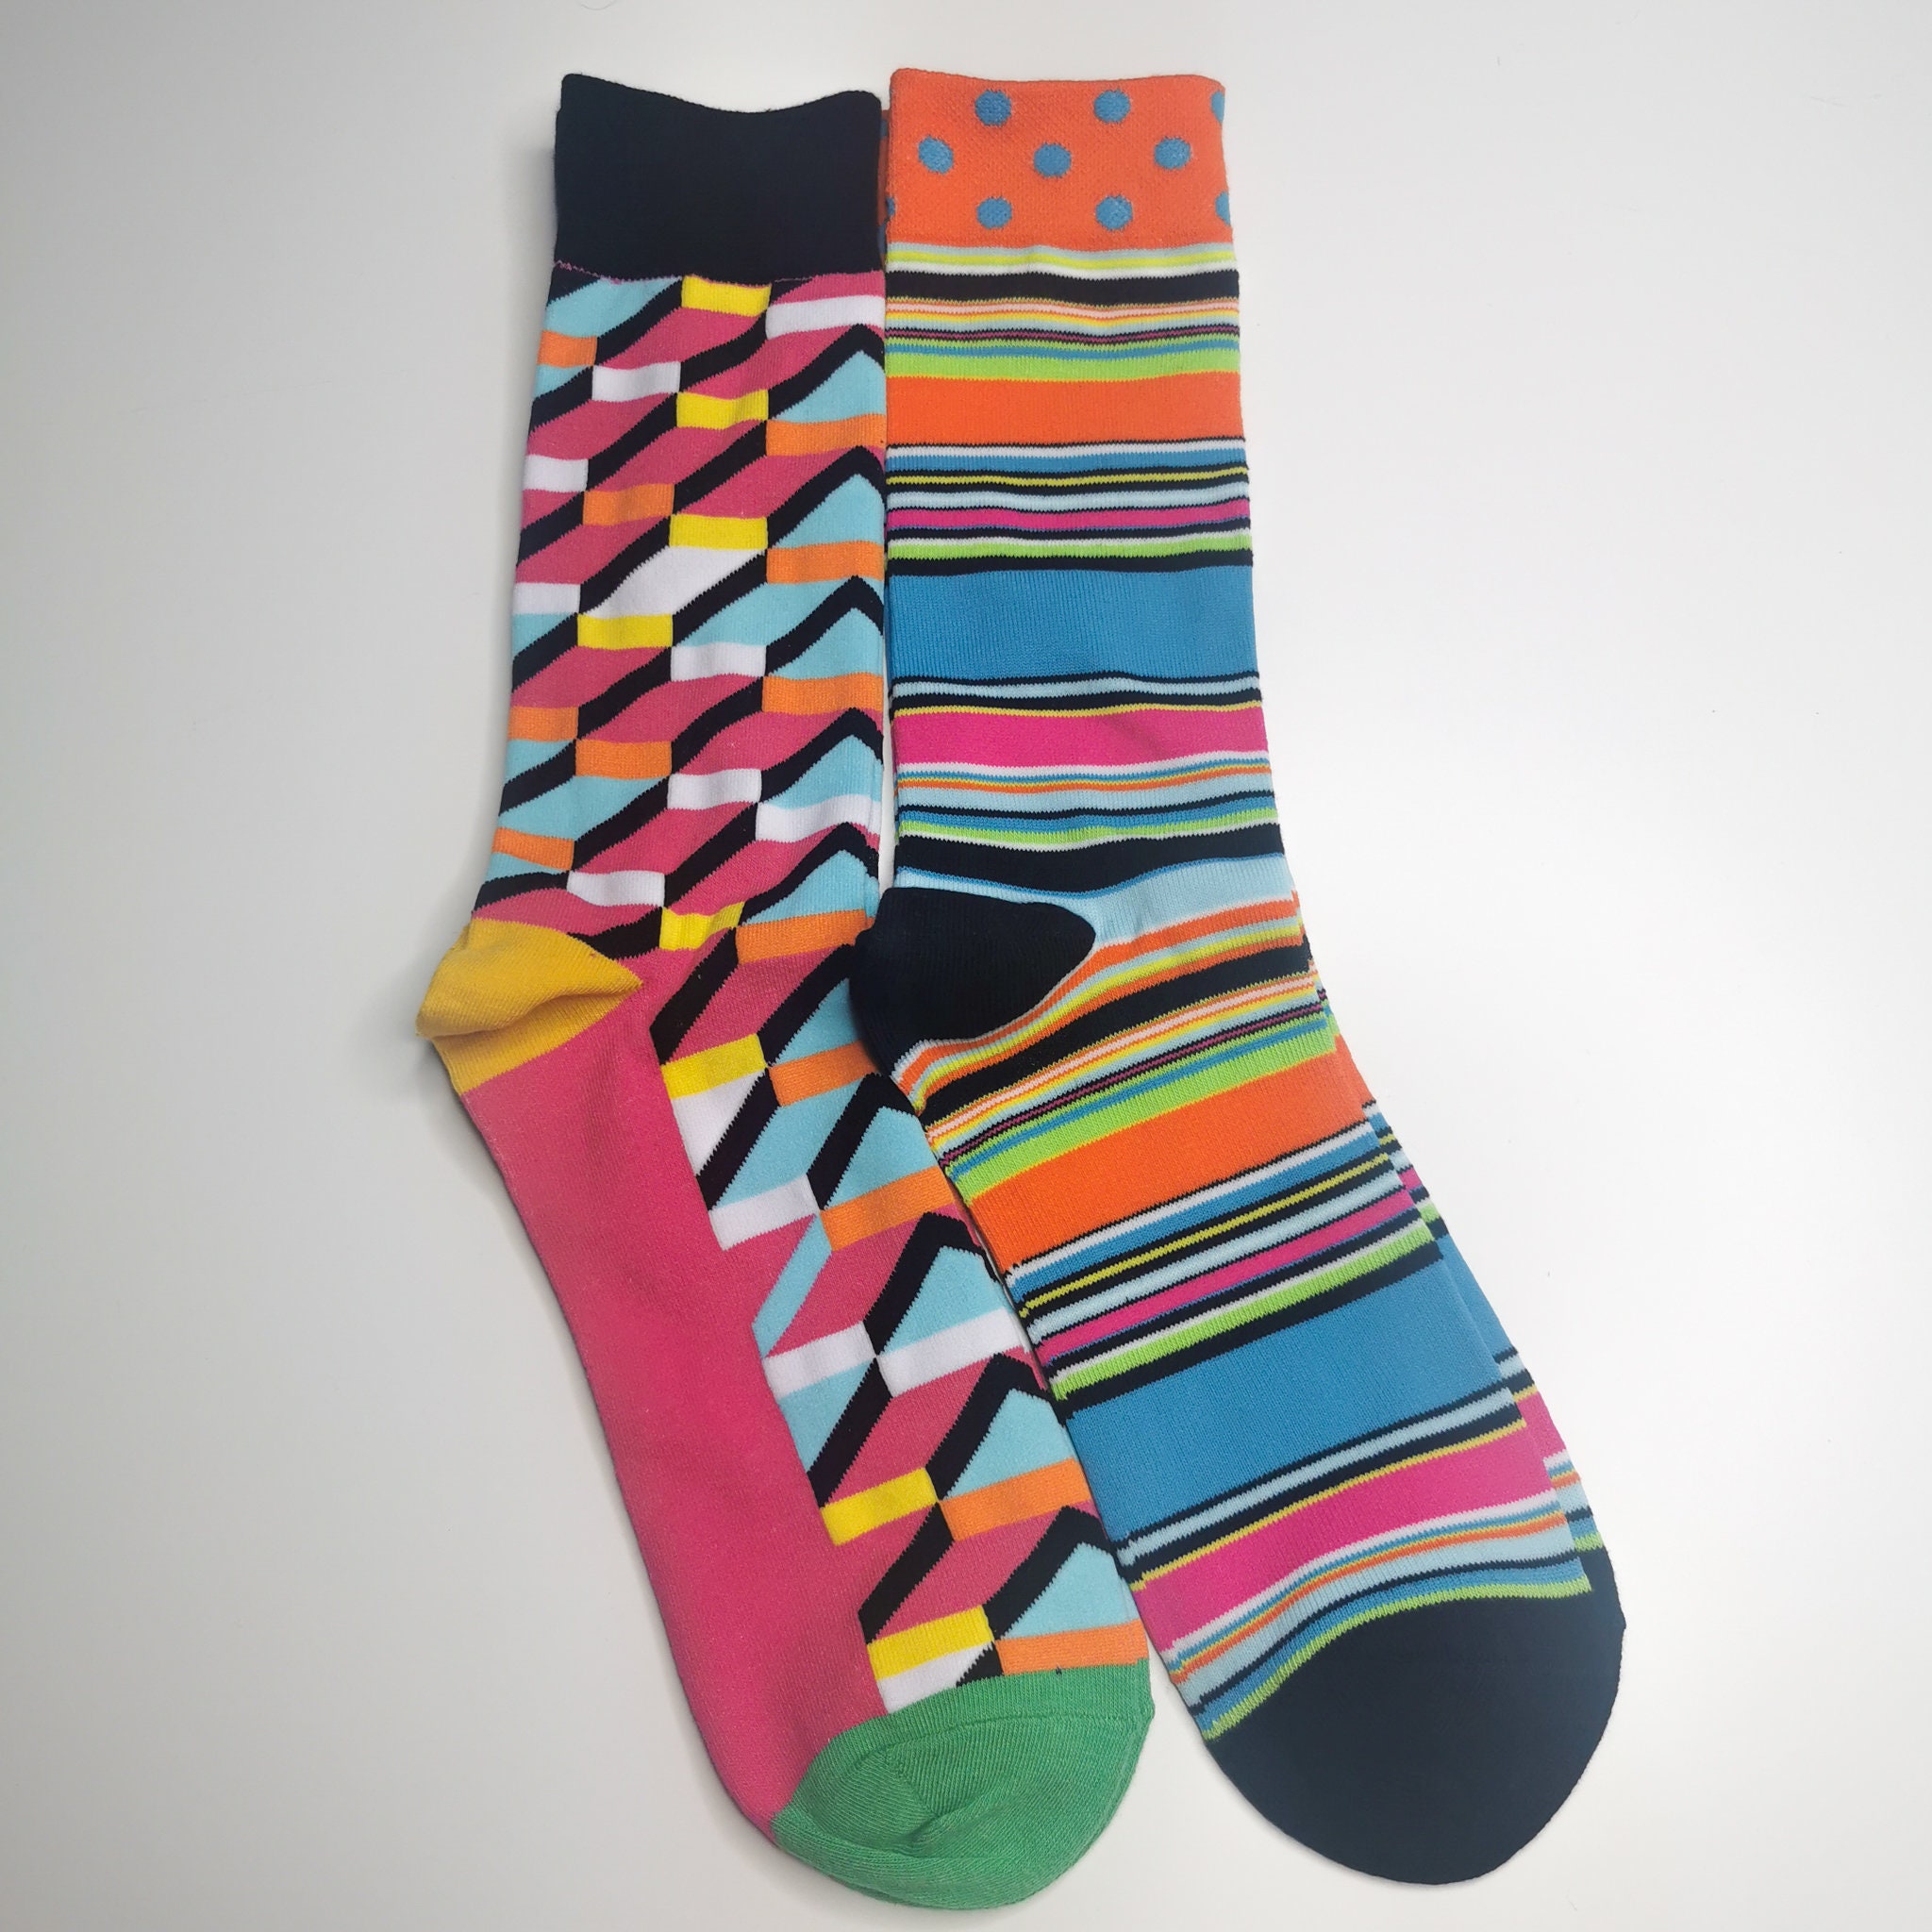 Vivid Striped and Dotted Socks Bright Colourful Soft Socks - Etsy UK